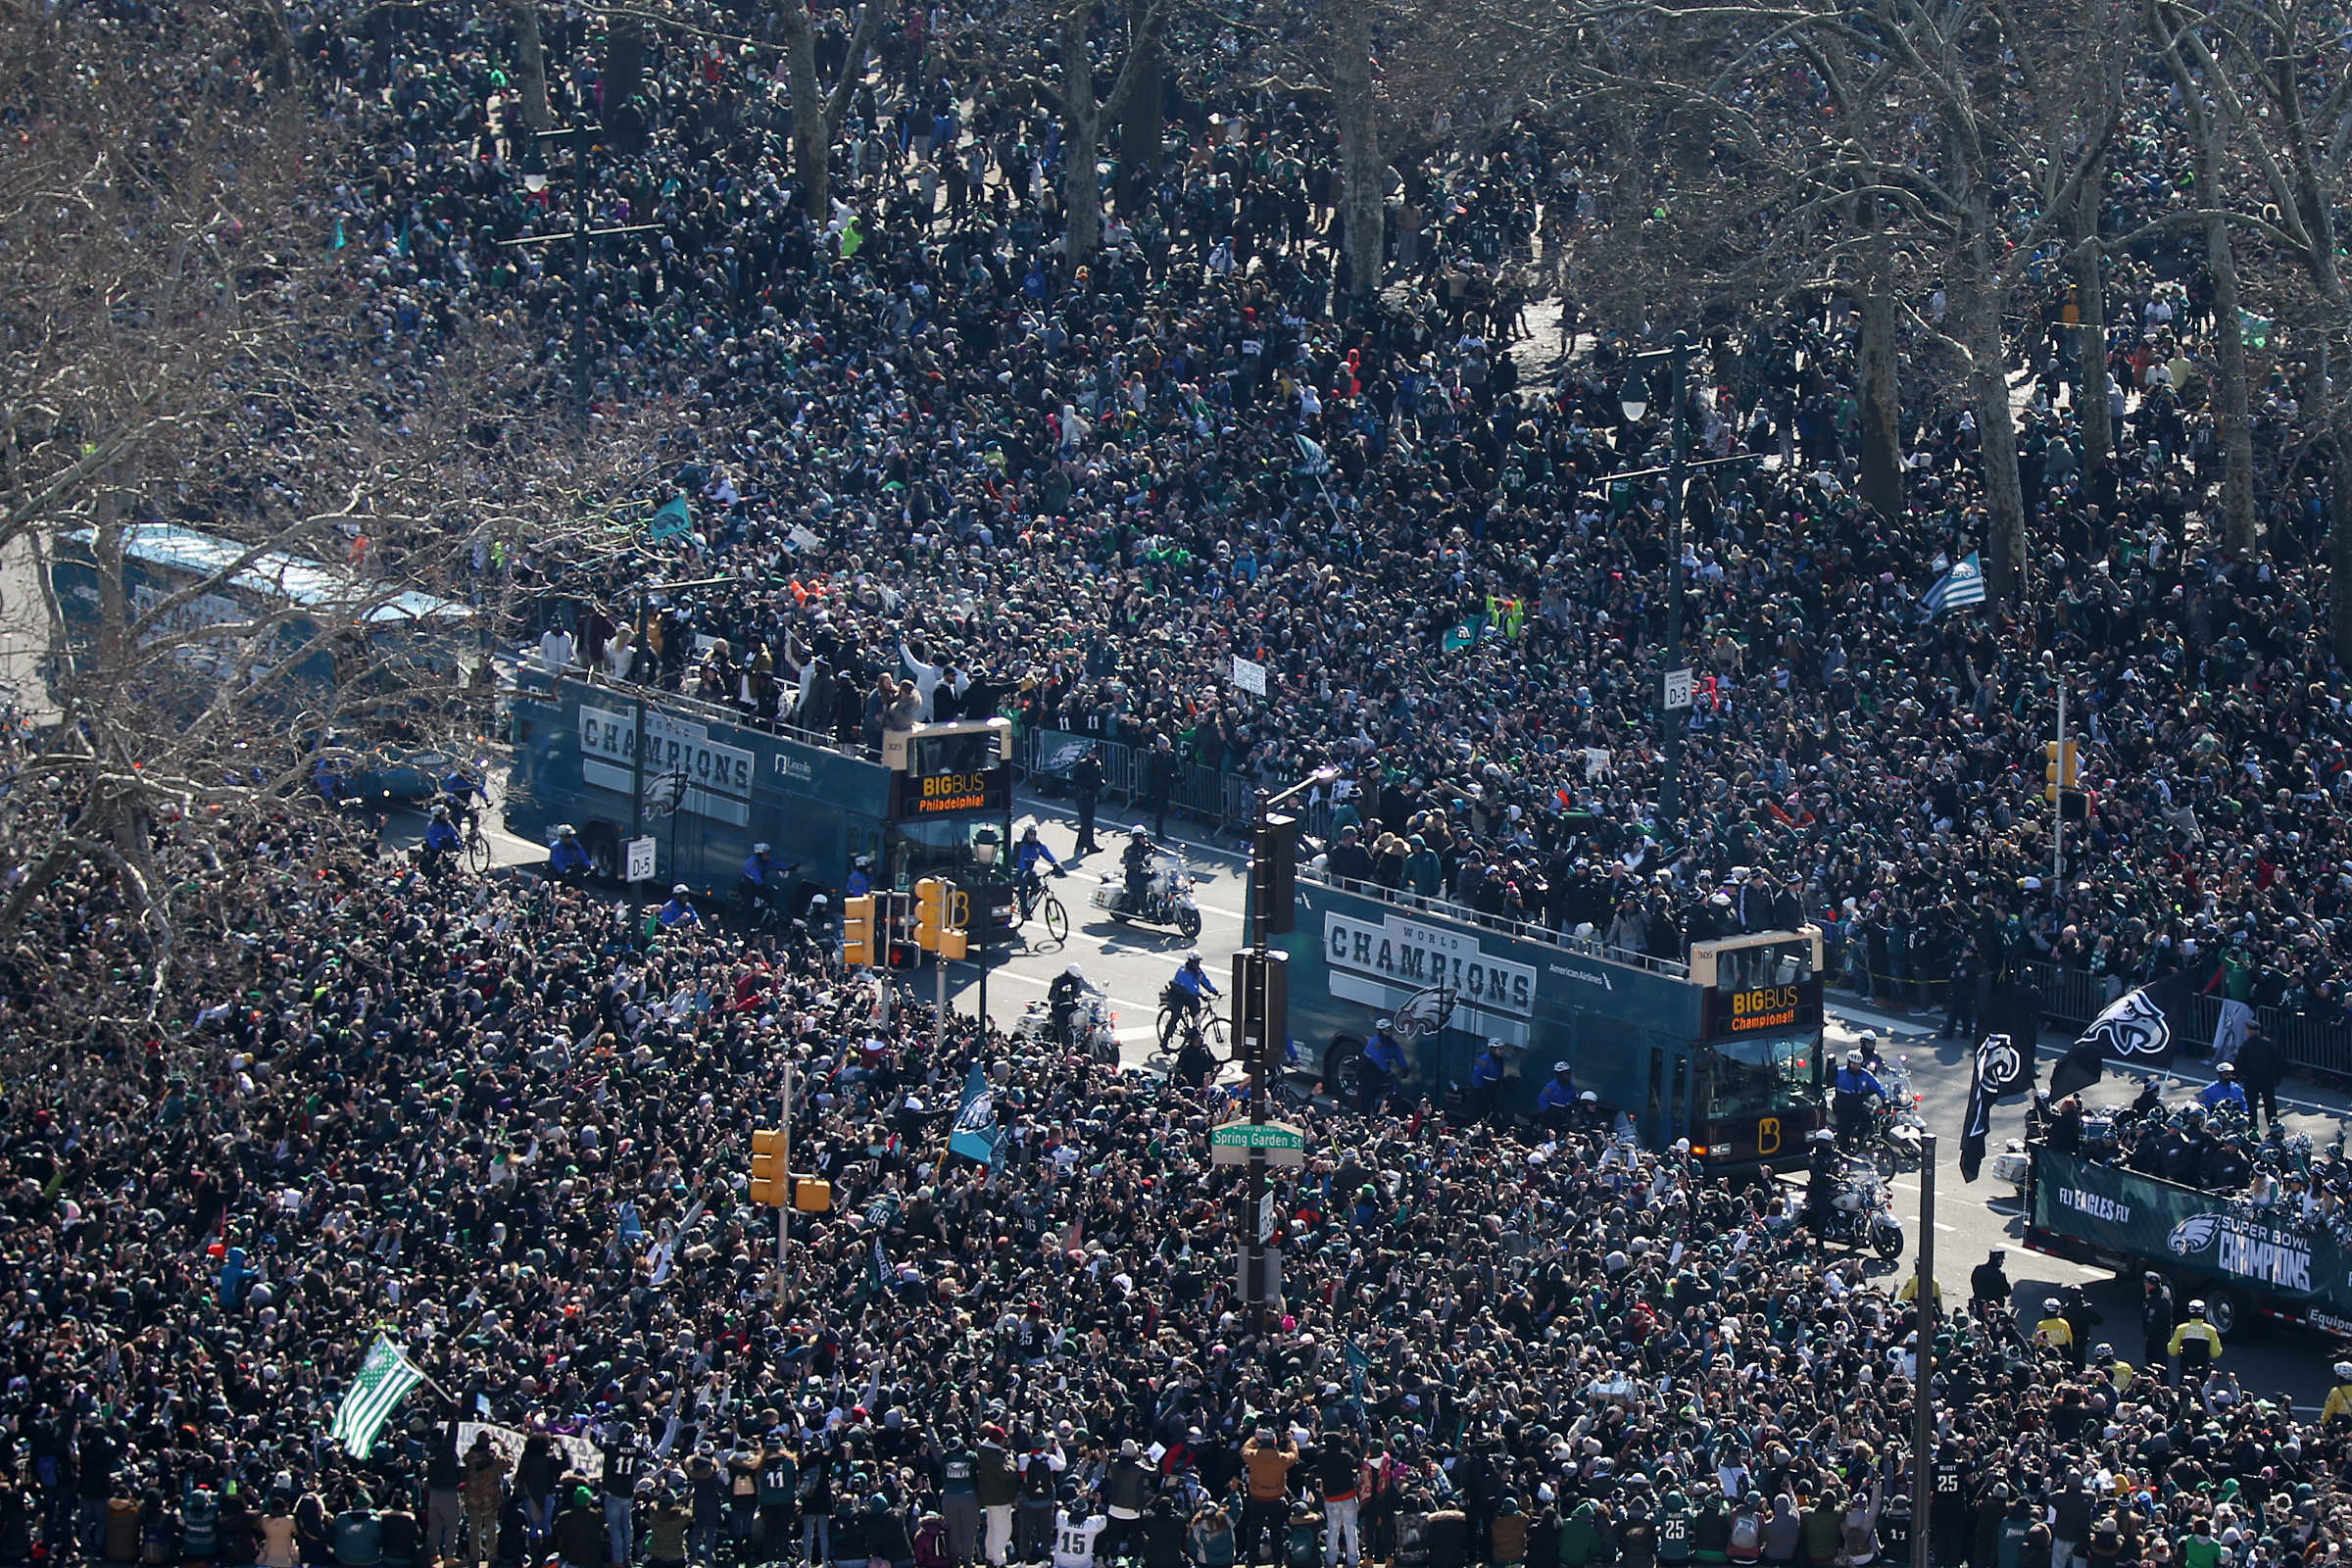 The 18 craziest scenes from the Eagles' Super Bowl parade